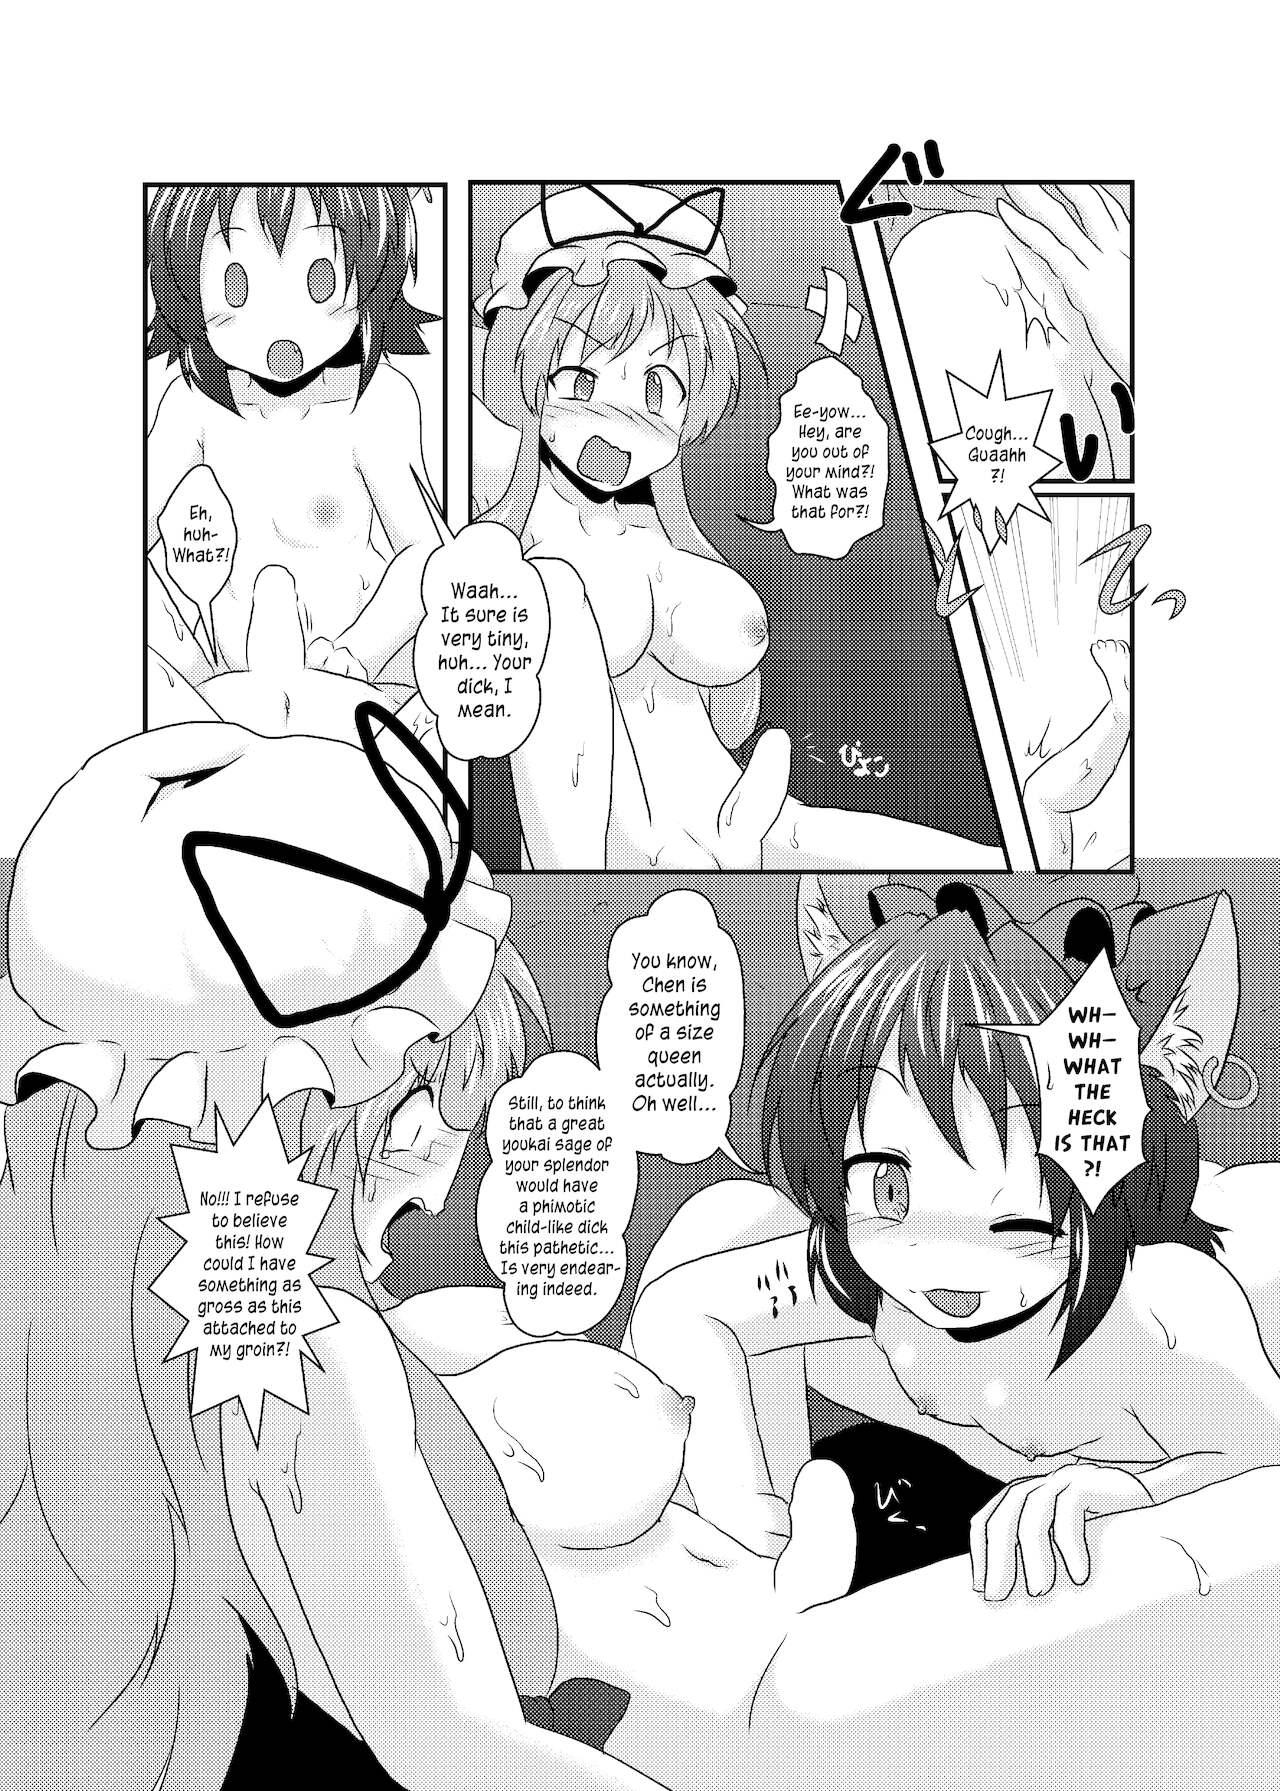 Hooker Chotto Tsukarechatta Mitai | I think I'm a little possessed! - Touhou project Adorable - Page 10